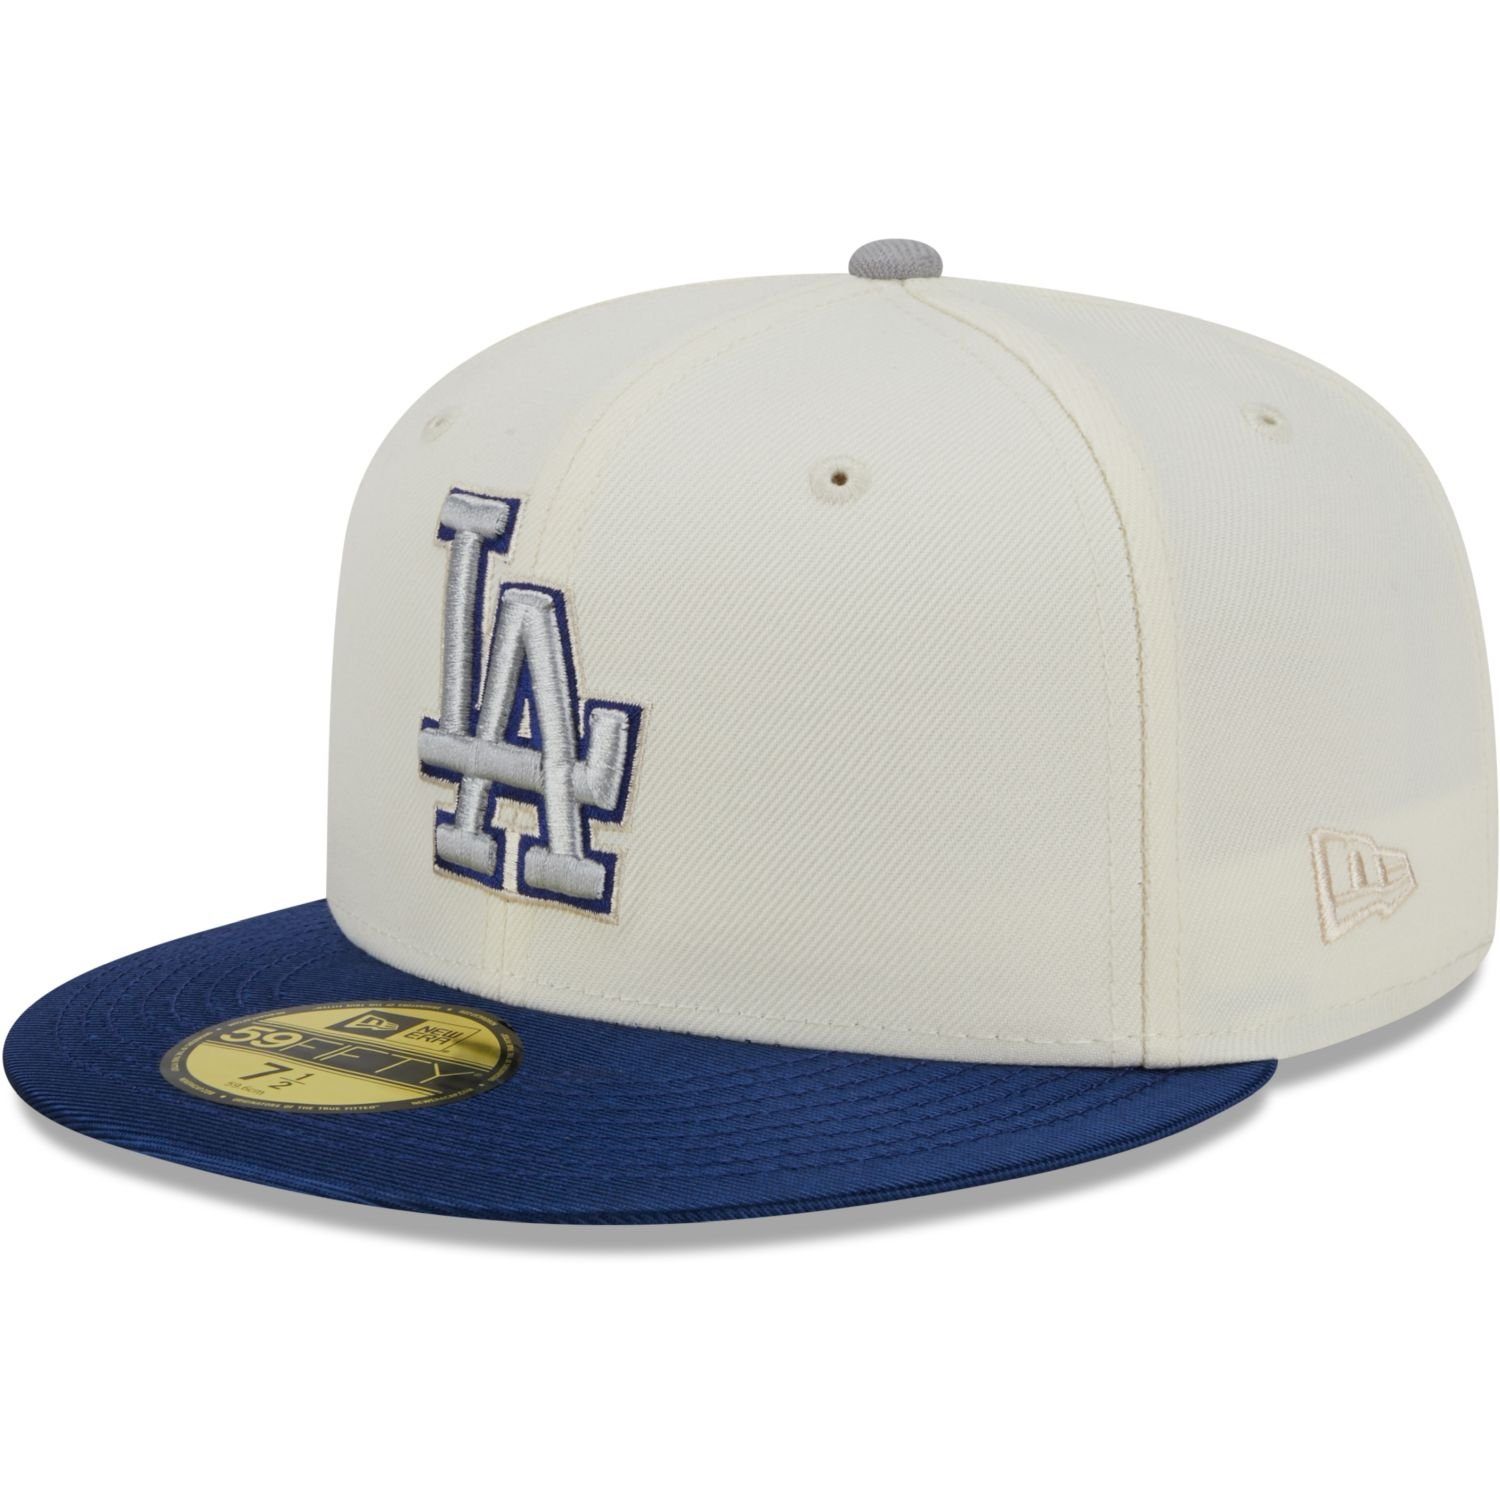 New Era Fitted Cap 59Fifty SHIMMER Los Angeles Dodgers